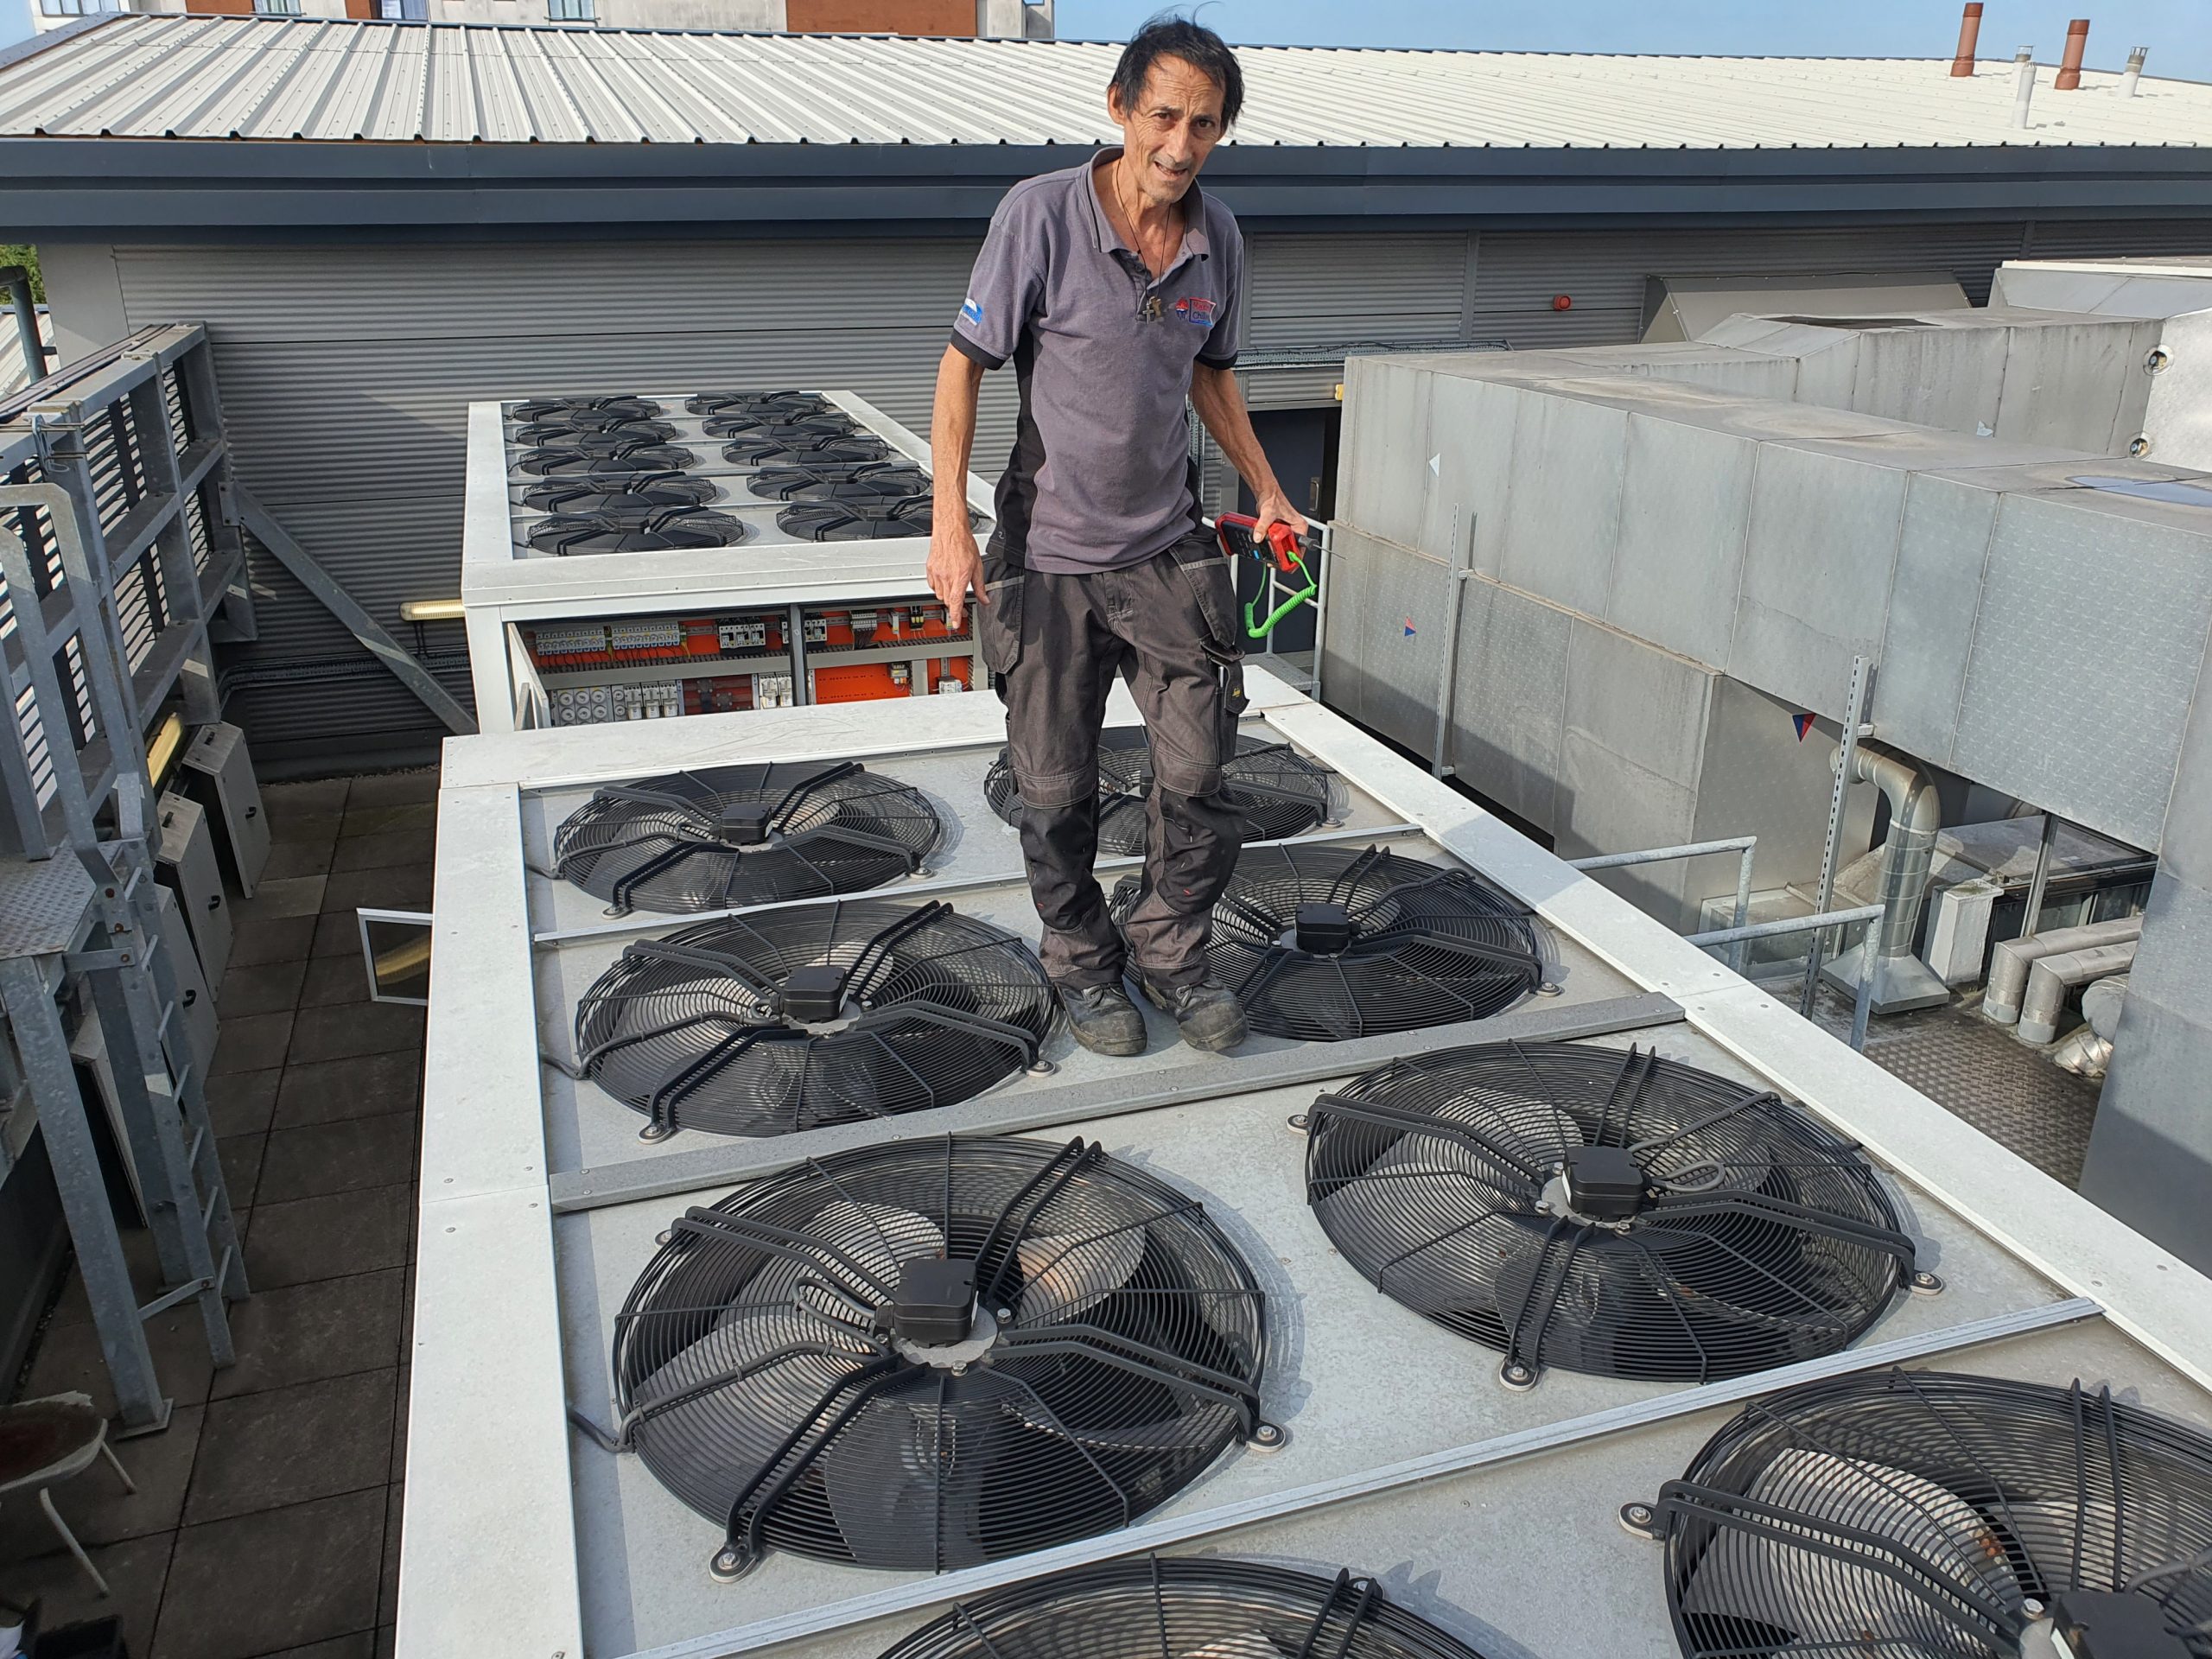 Spanish chiller engineer on top of an air cooled chiller during industrial chiller repair